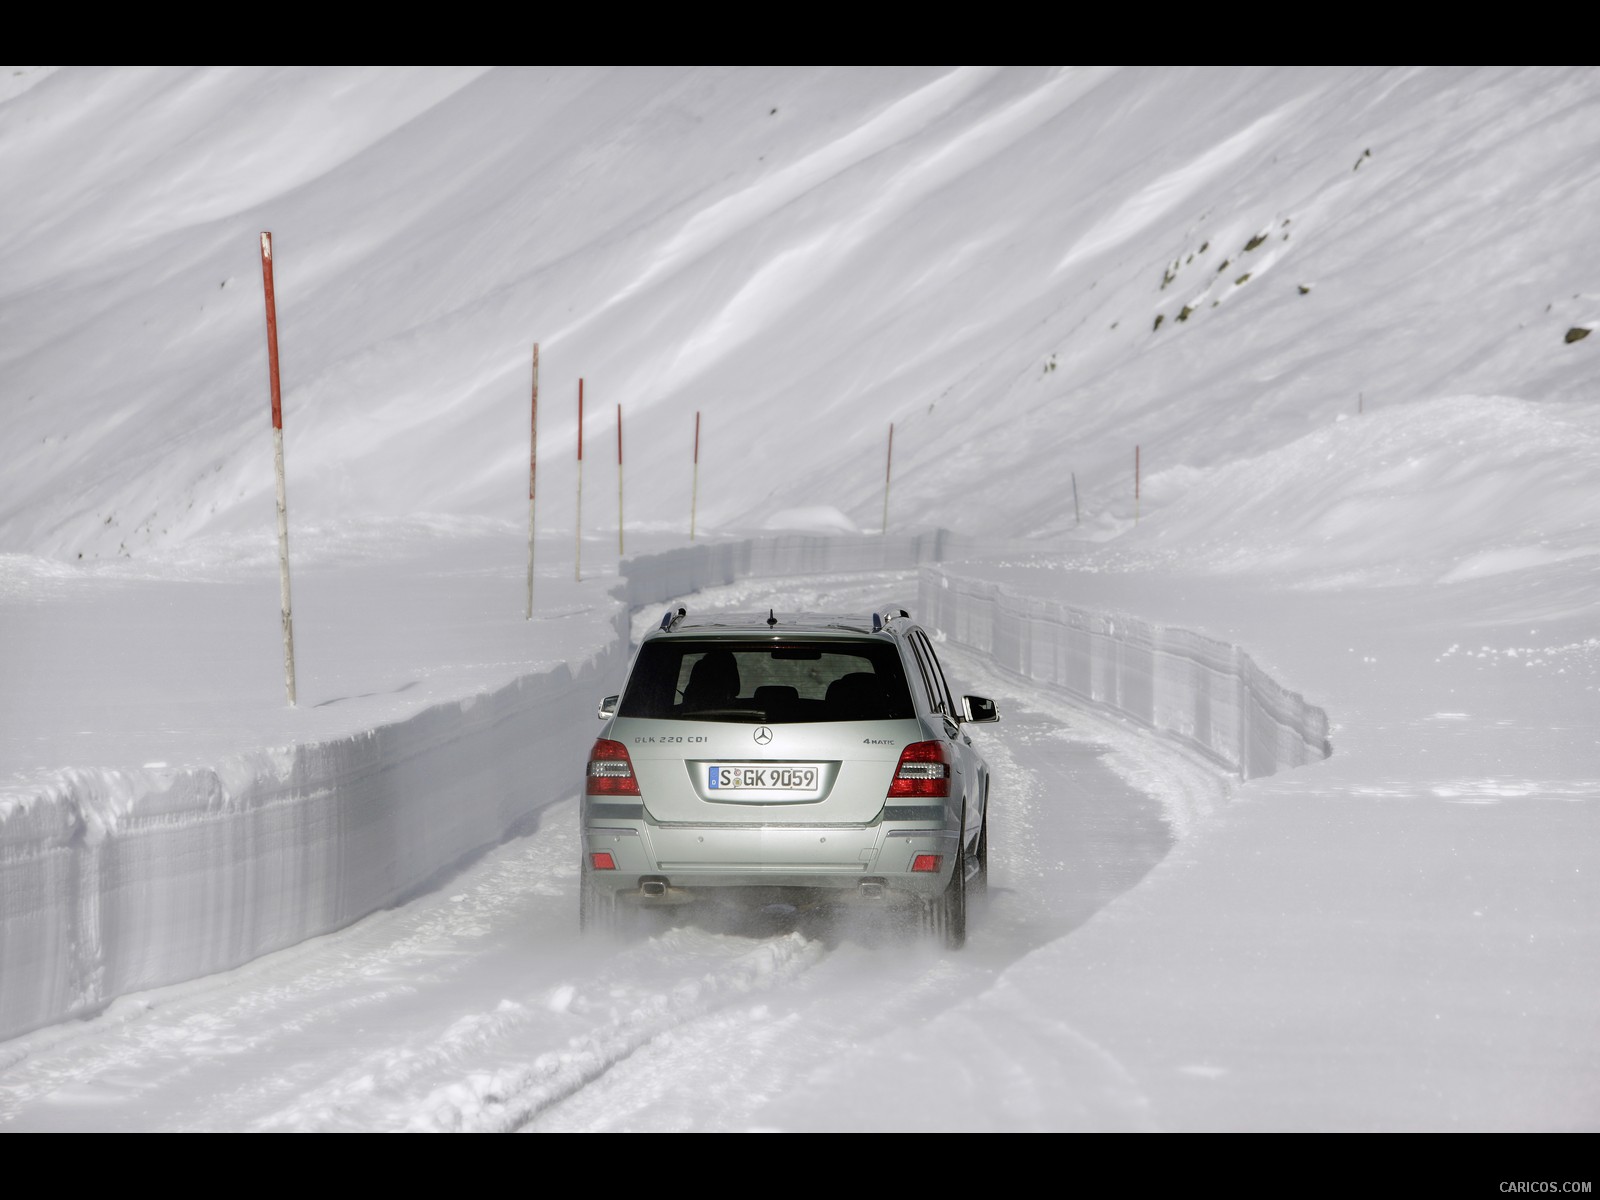 Mercedes-Benz GLK-Class - On Snow - Rear Angle , #35 of 351